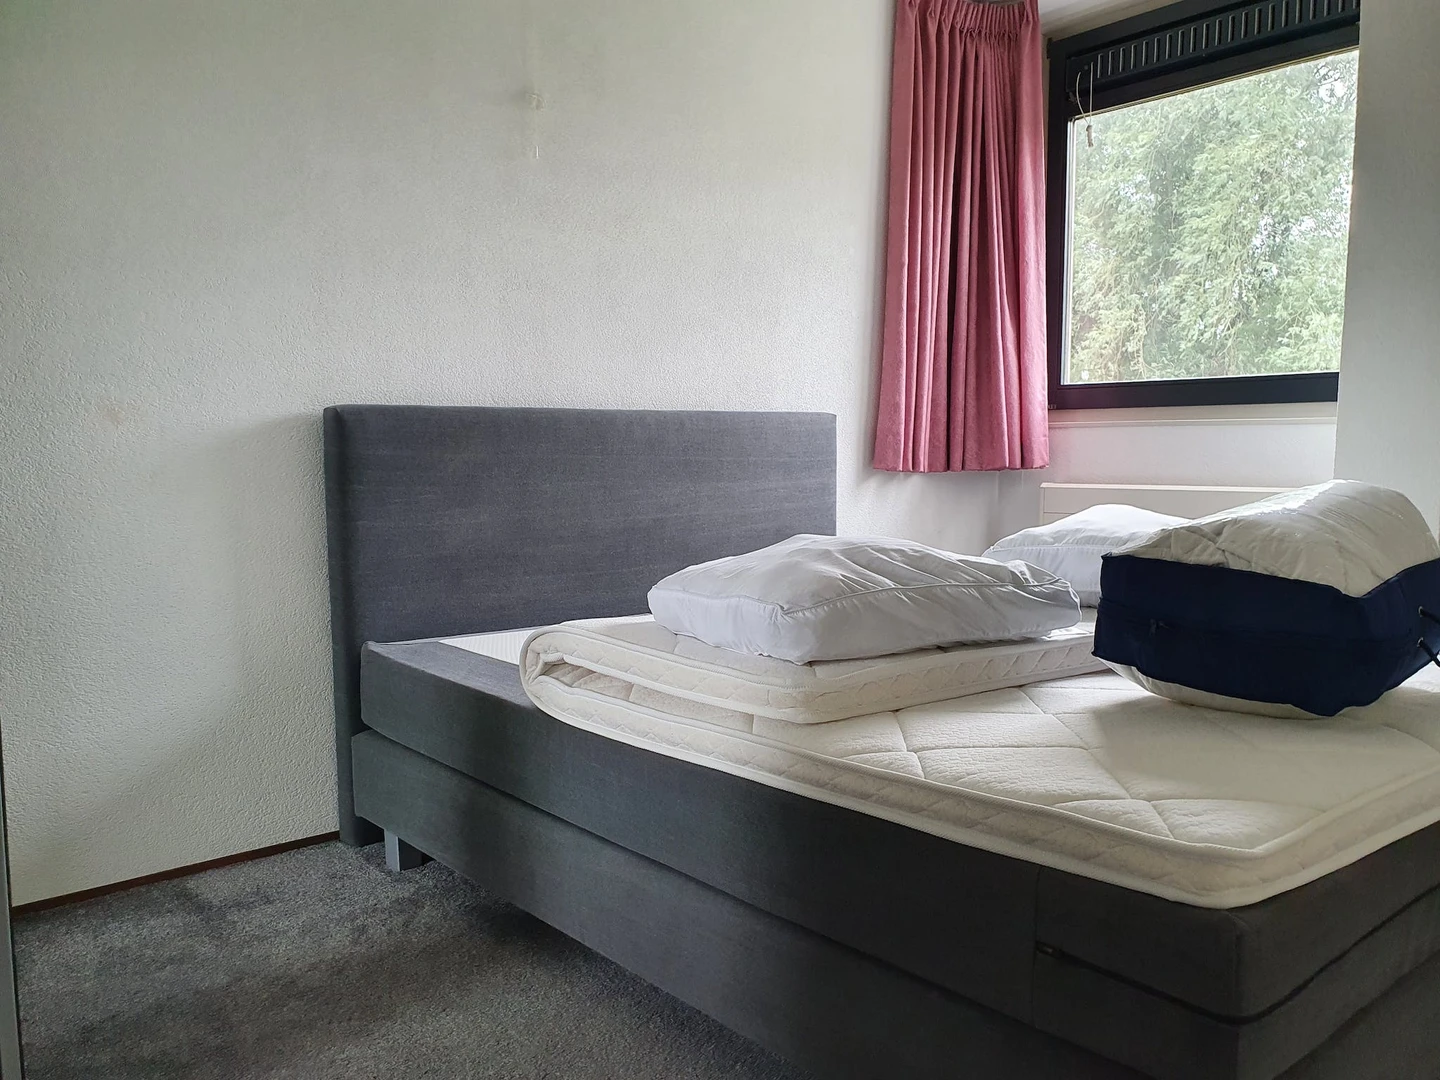 Accommodation with 3 bedrooms in Leiden